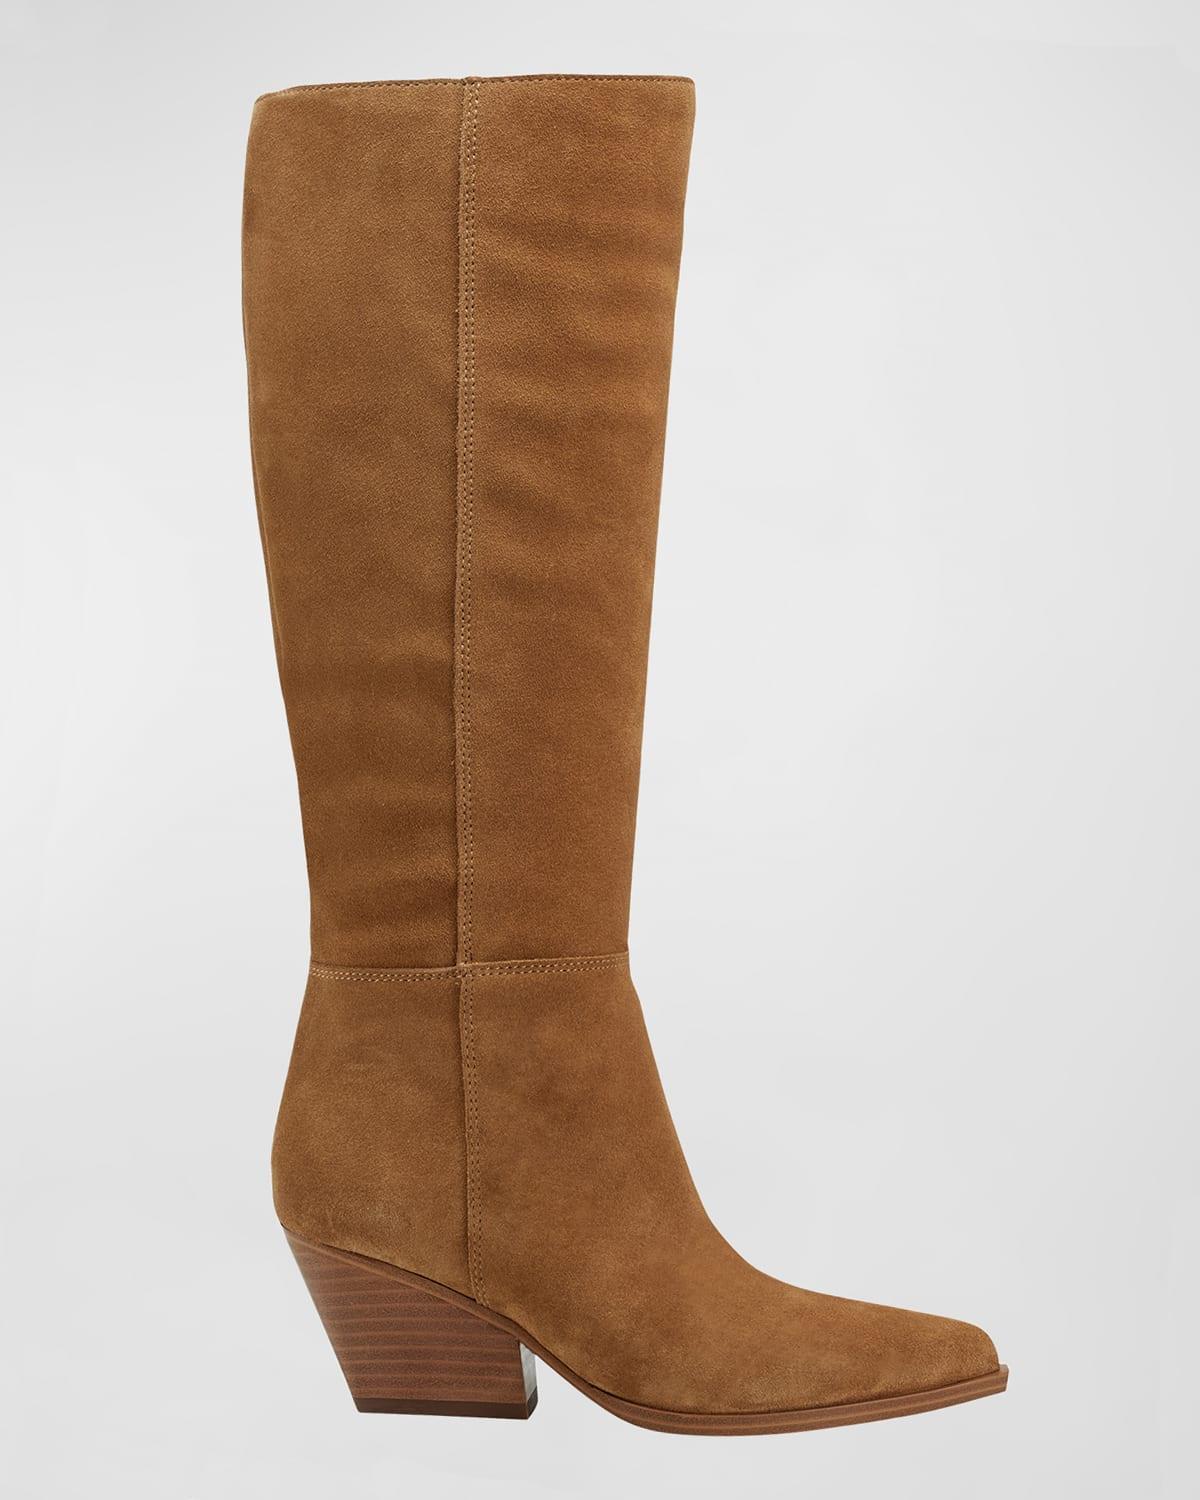 Marc Fisher LTD Challi Pointed Toe Knee High Boot Product Image